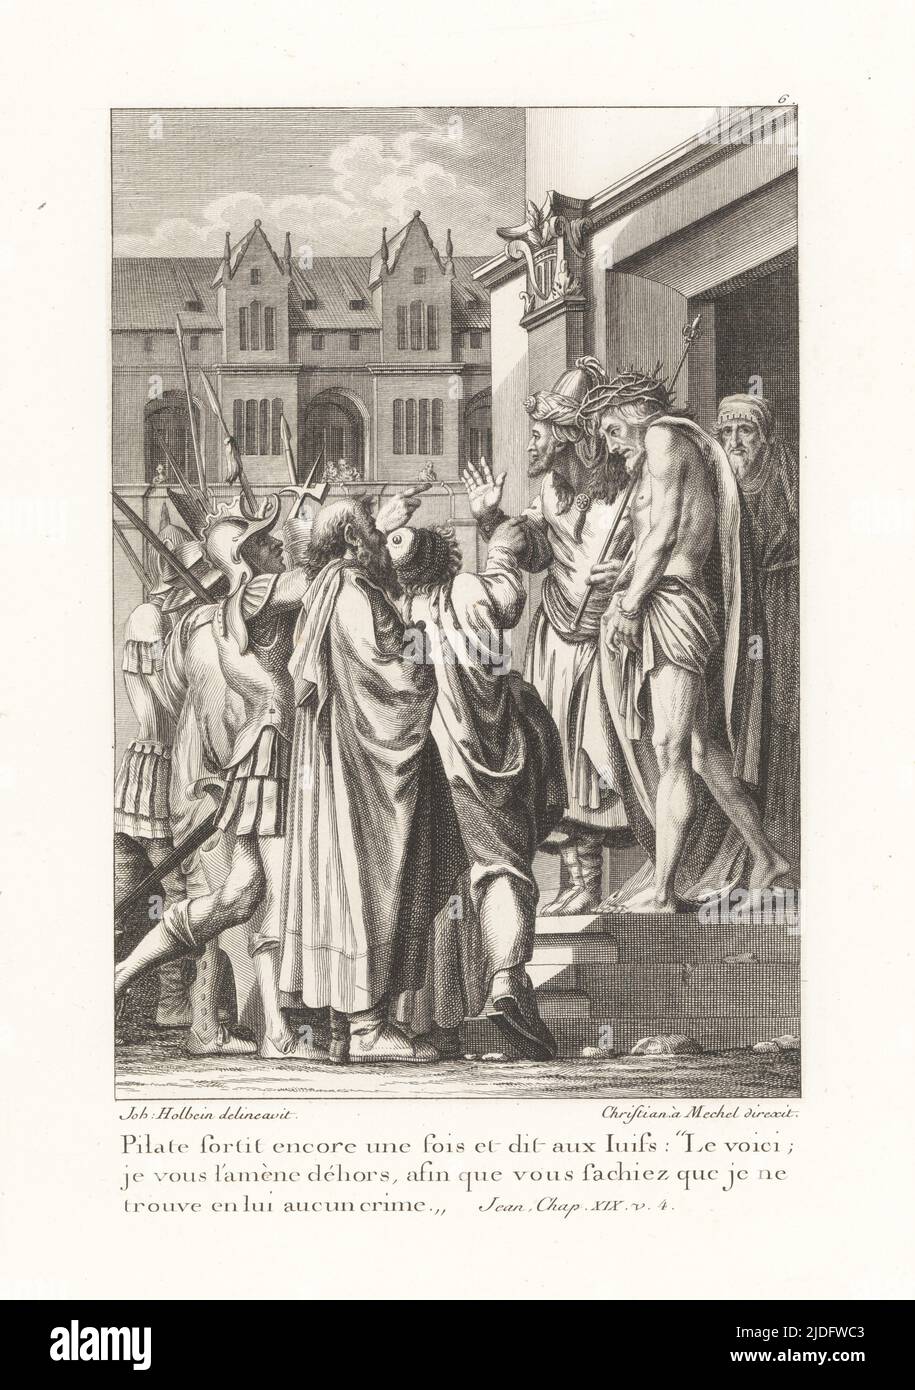 Pilate brings out Jesus Christ again in front of the Jews. Pilate fortit encore une fois et dit aux Juifs. John XIX v. 4. From Le Passion de Notre Seigneur, The Passion of our Lord. Copperplate engraving by Christian Mechel after a portrait by Hans Holbein in Christian von Mechel's Oeuvre de Jean Holbein, Chez Guillaume Haas, Basel, 1790. Stock Photo